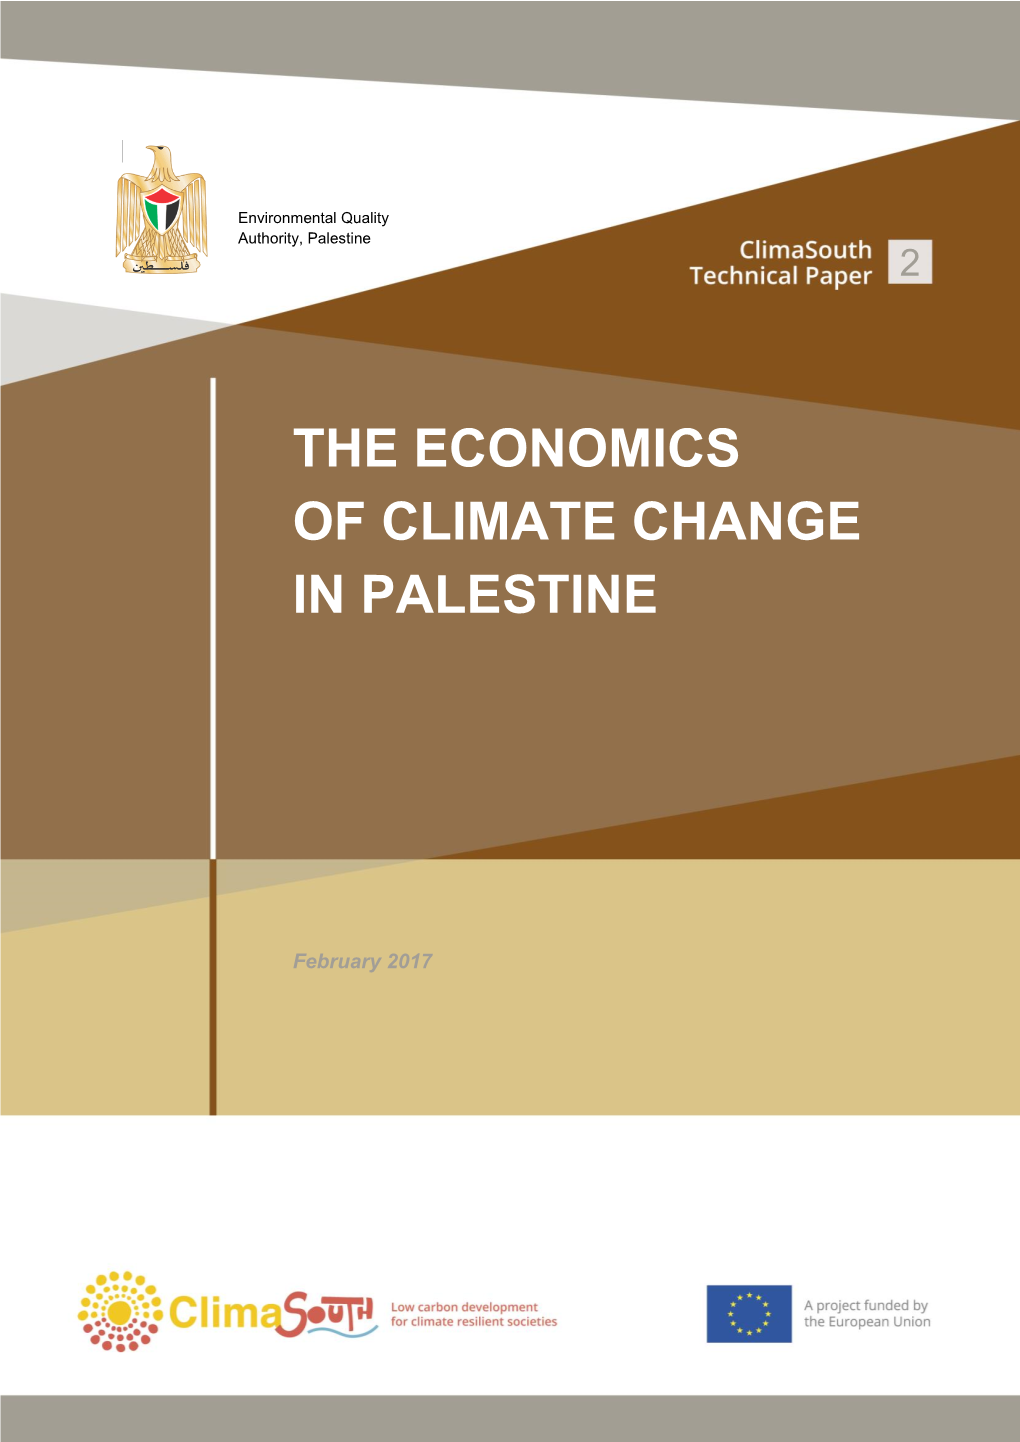 The Economics of Climate Change in Palestine